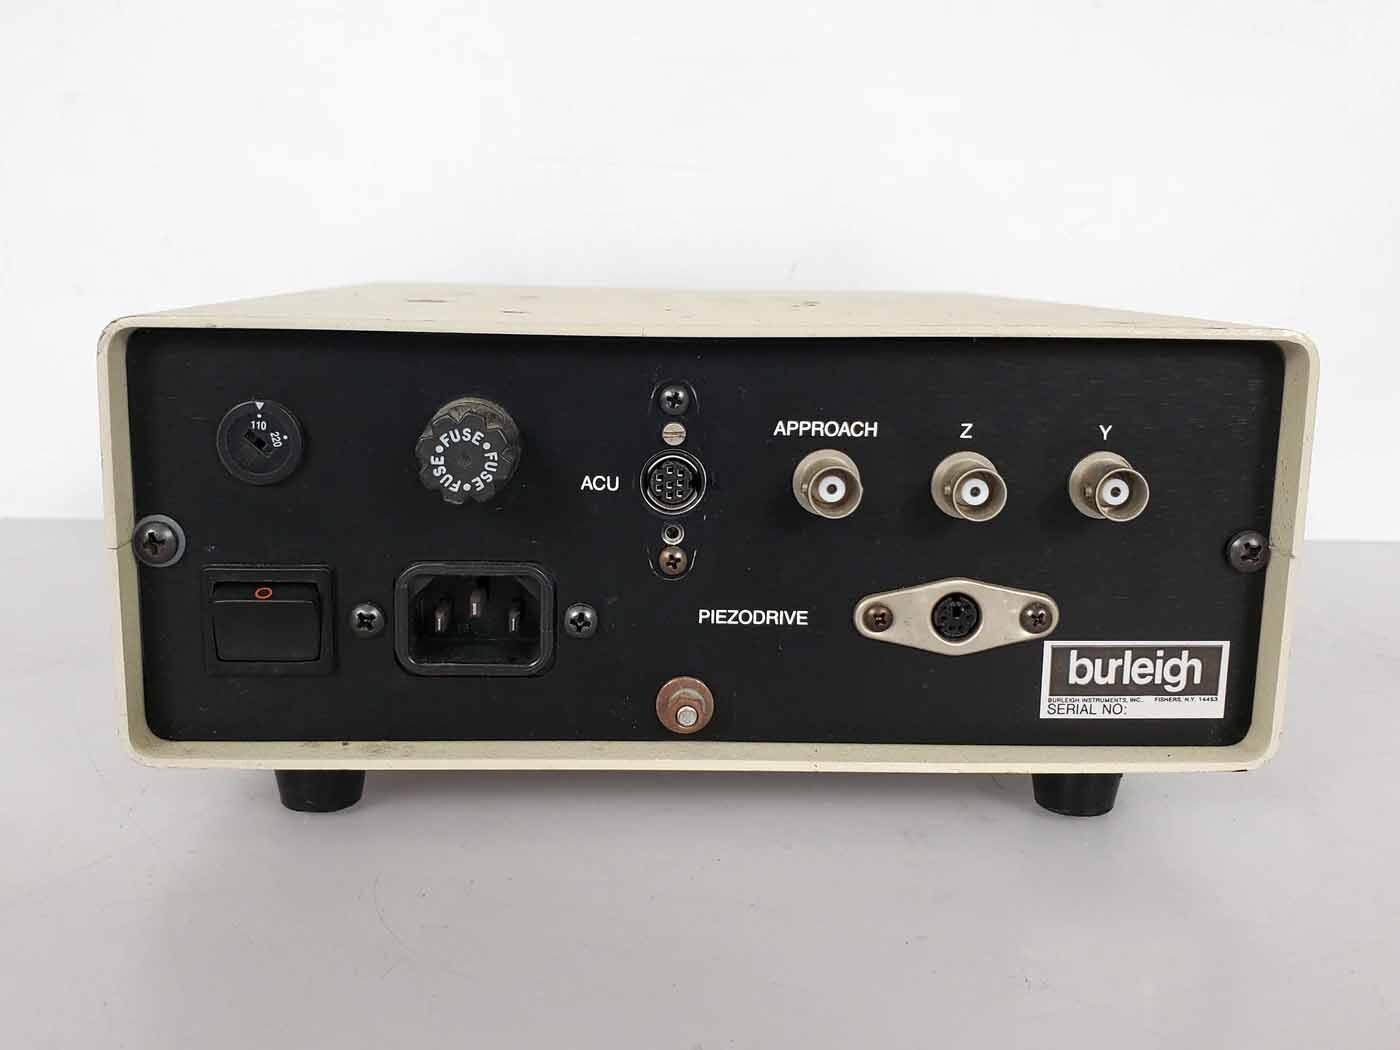 Photo Used BURLEIGH PCS-250 For Sale